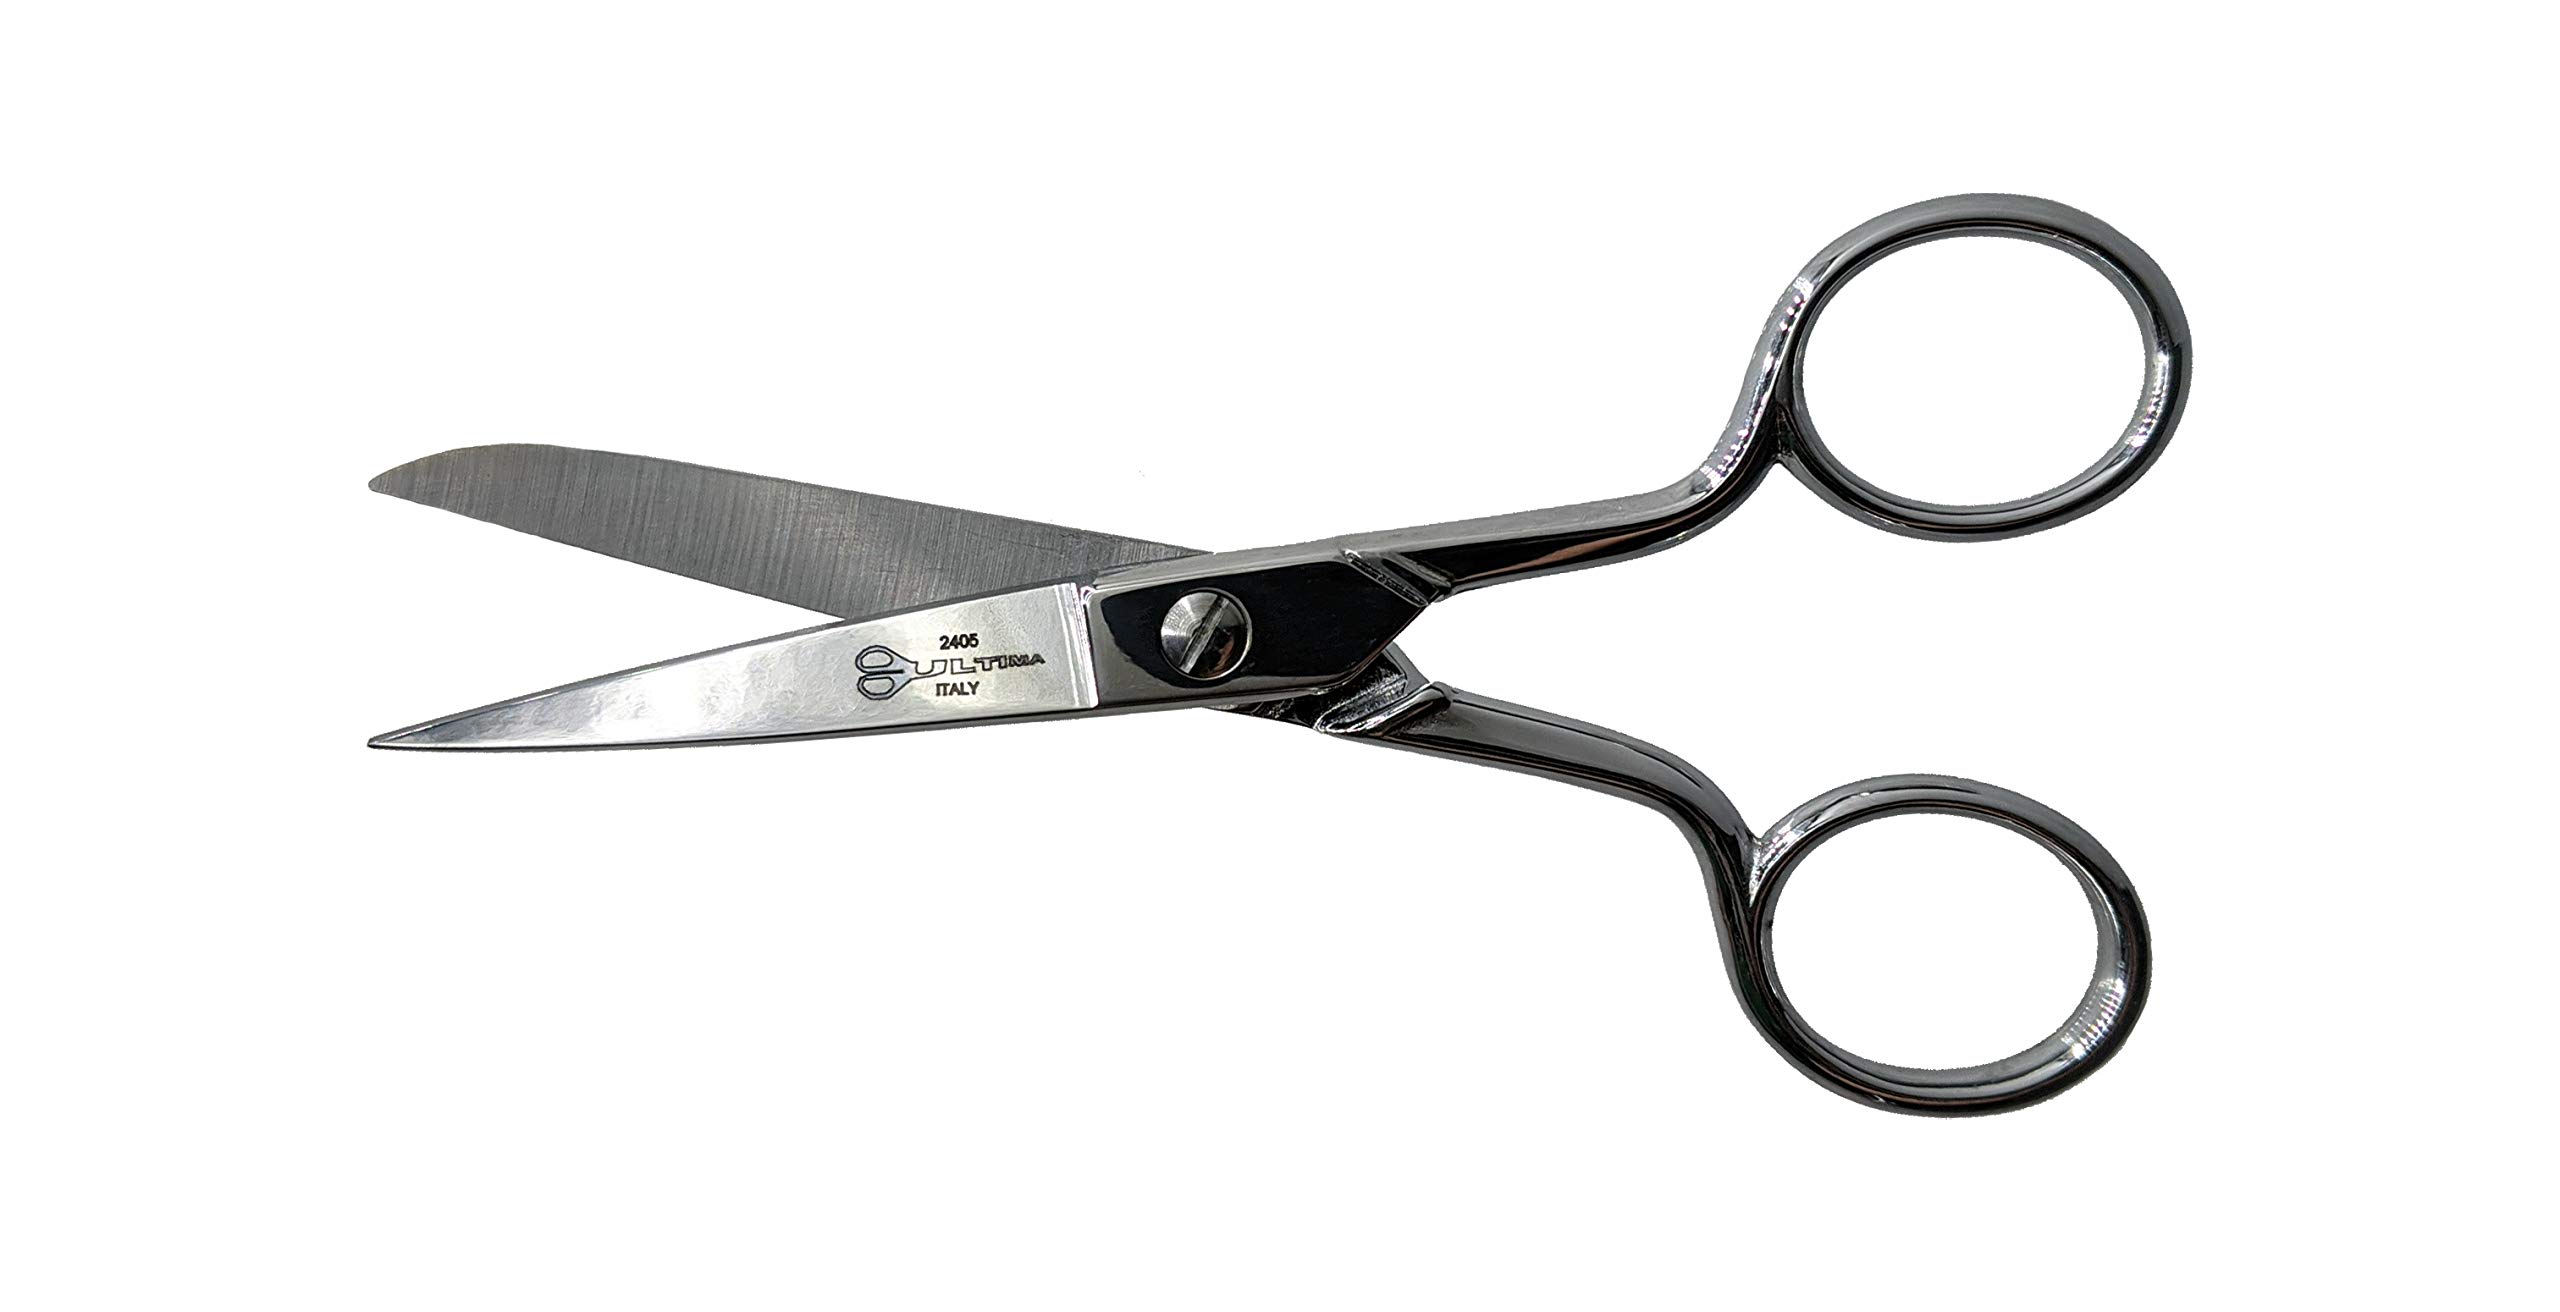 Ultima 5 Inch Dress Maker Scissors – Drop Forged Carbon Steel Dressmaker’s Sheers, Chrome Plated with Straight Handles, Made in Italy